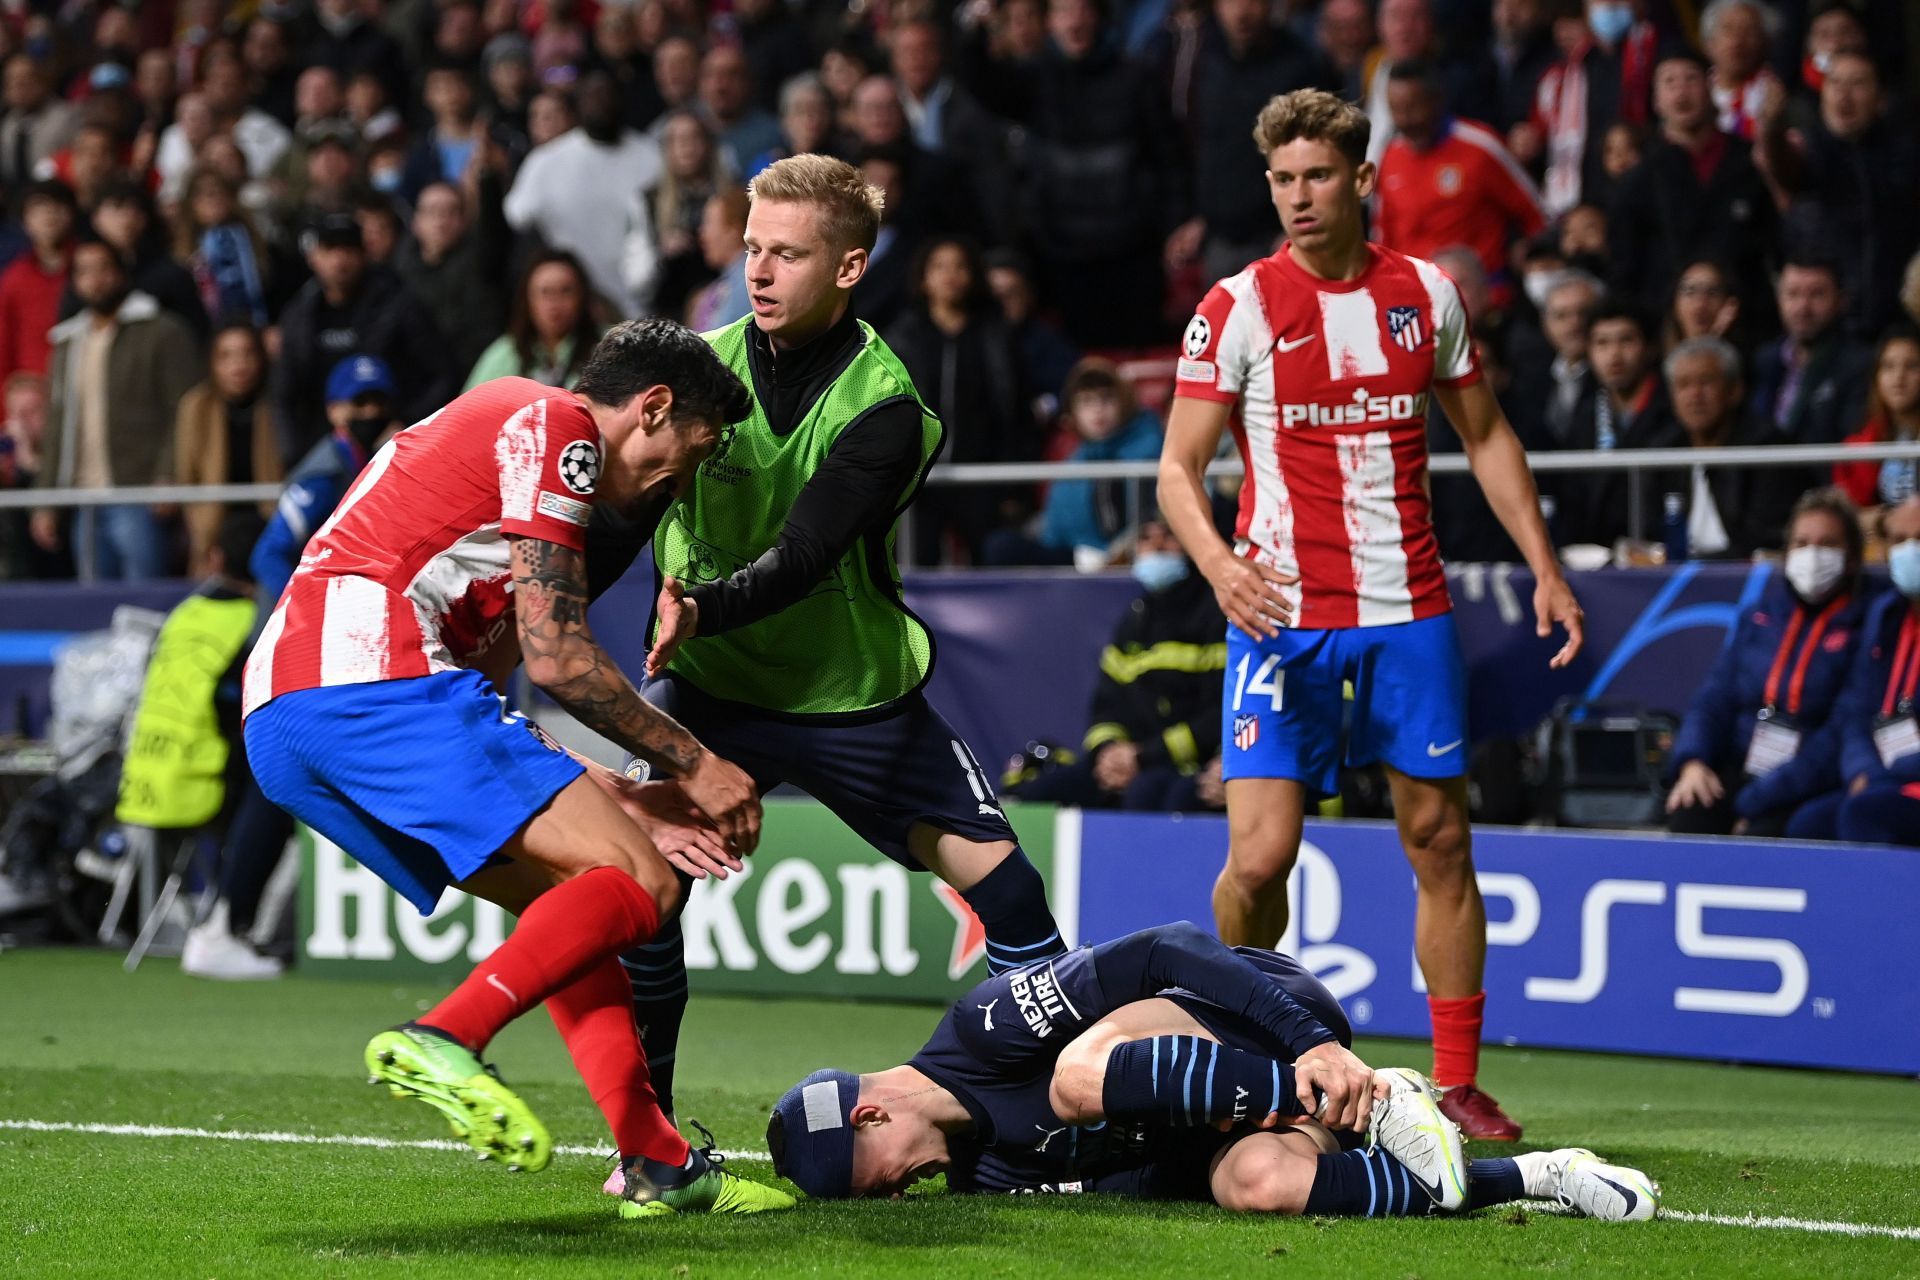 Tensions boiled over during the UCL tie